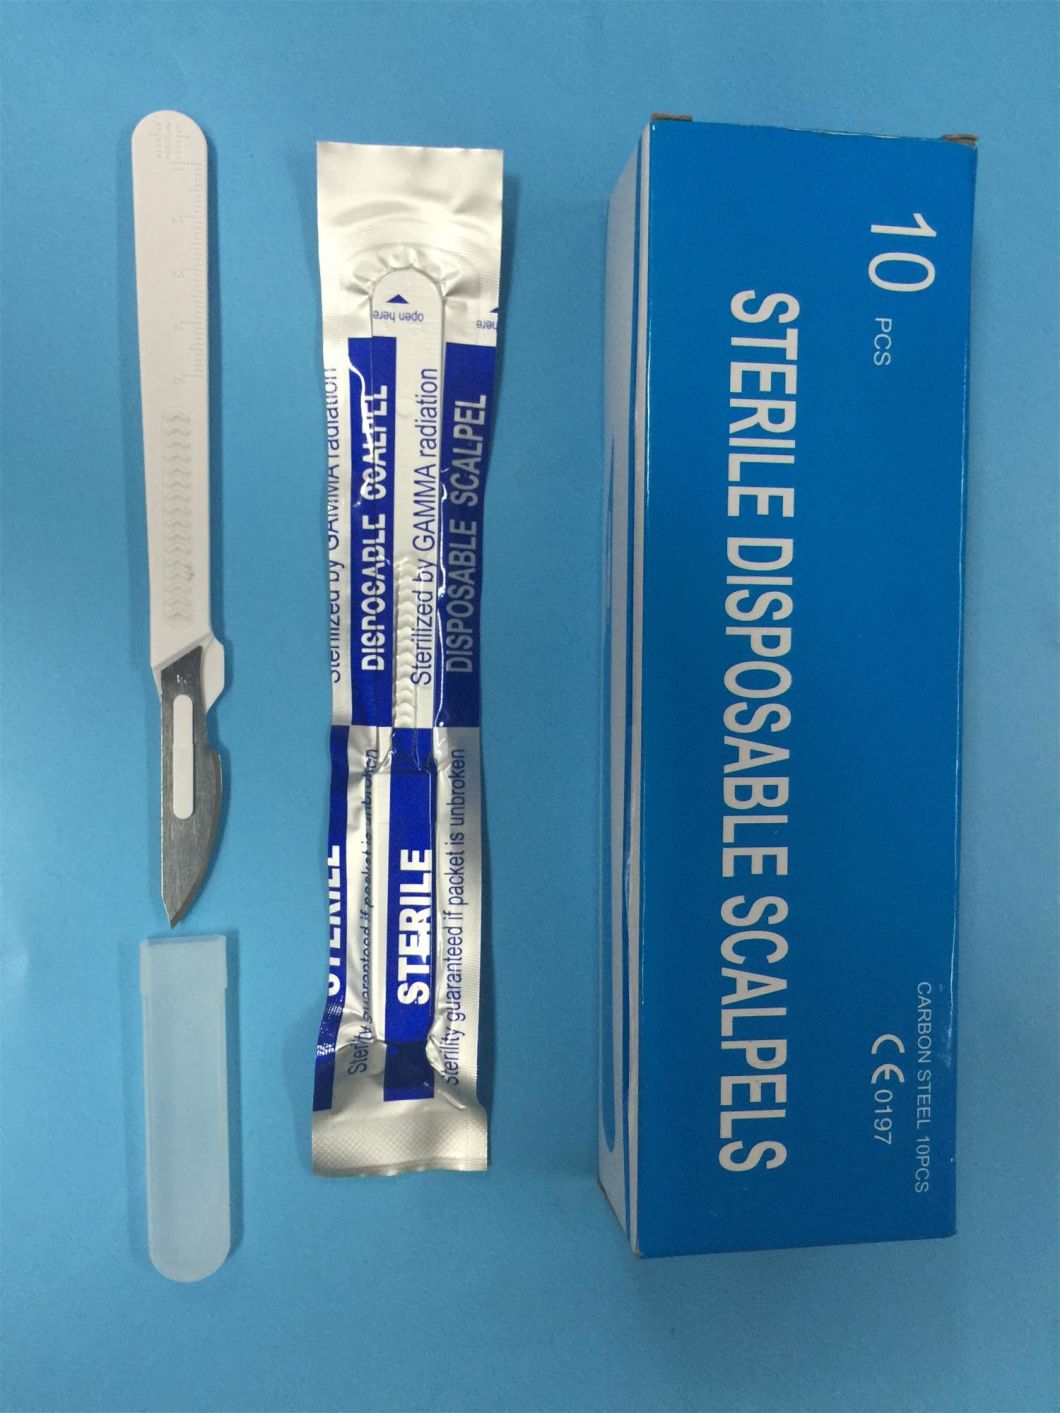 Single Use Surgical Scalpel of Various Sizes